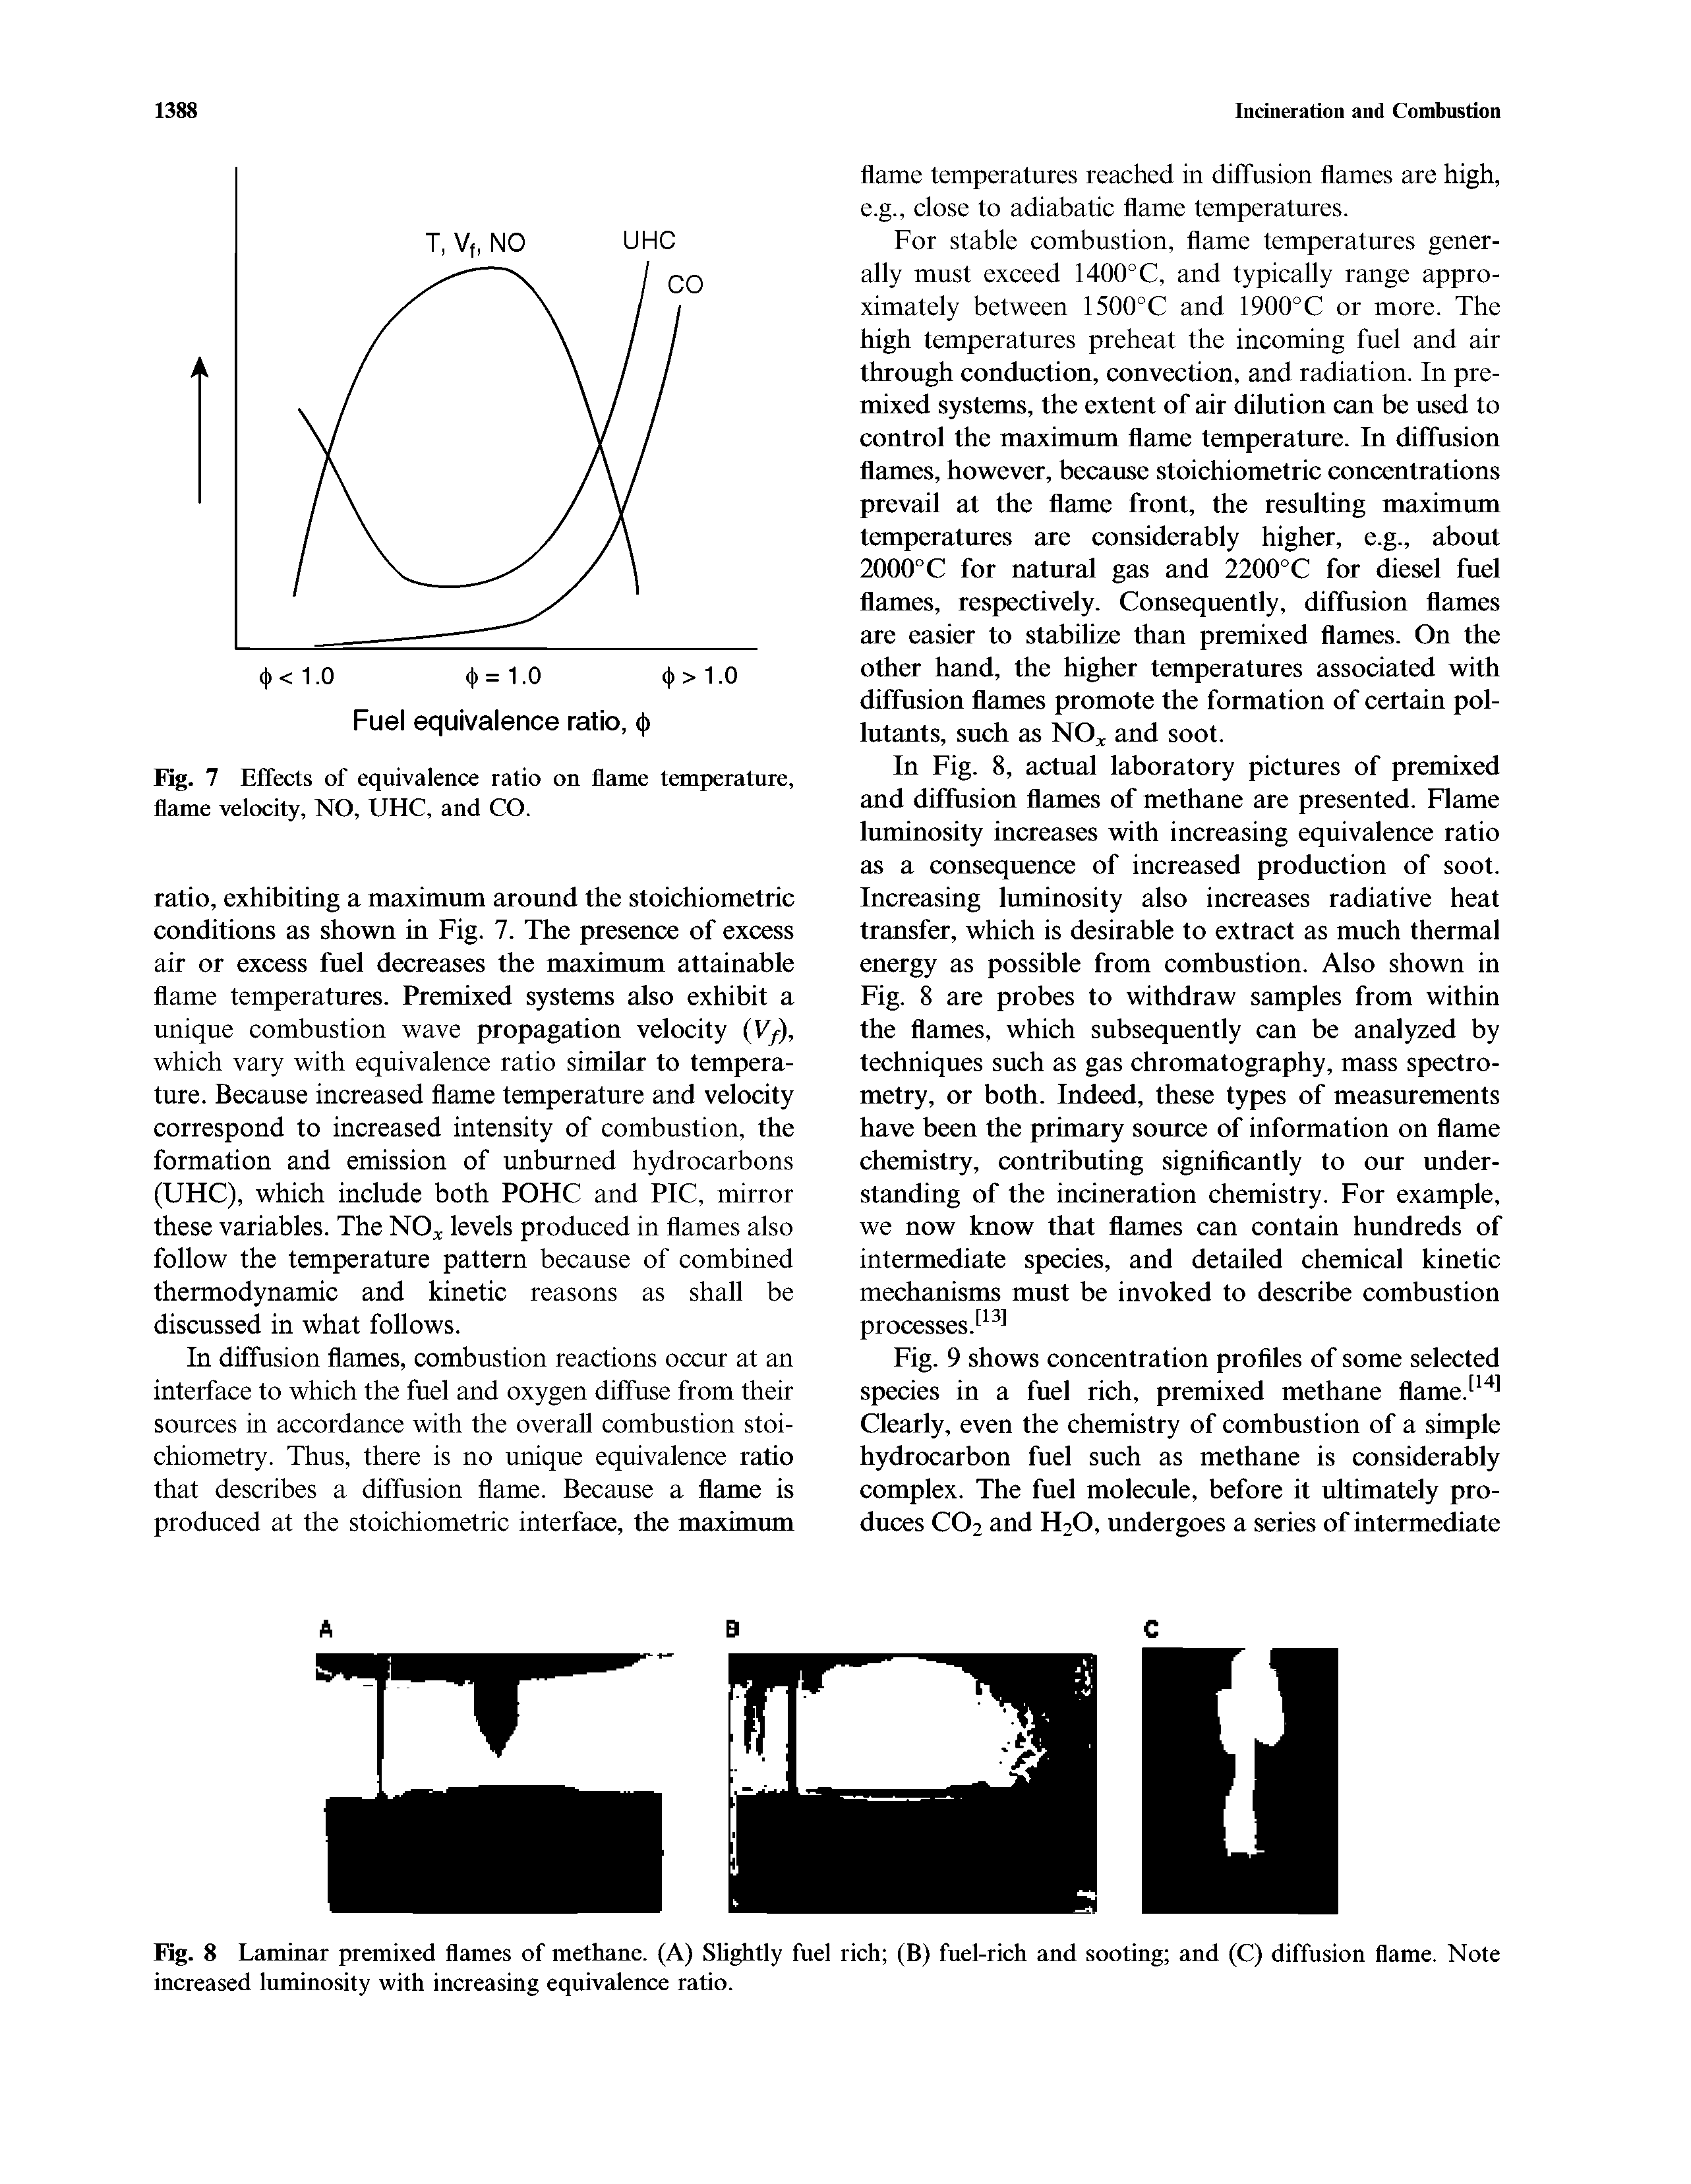 Fig. 8 Laminar premixed flames of methane. (A) Slightly fuel rich (B) fuel-rich and sooting and (C) diffusion flame. Note increased luminosity with increasing equivalence ratio.